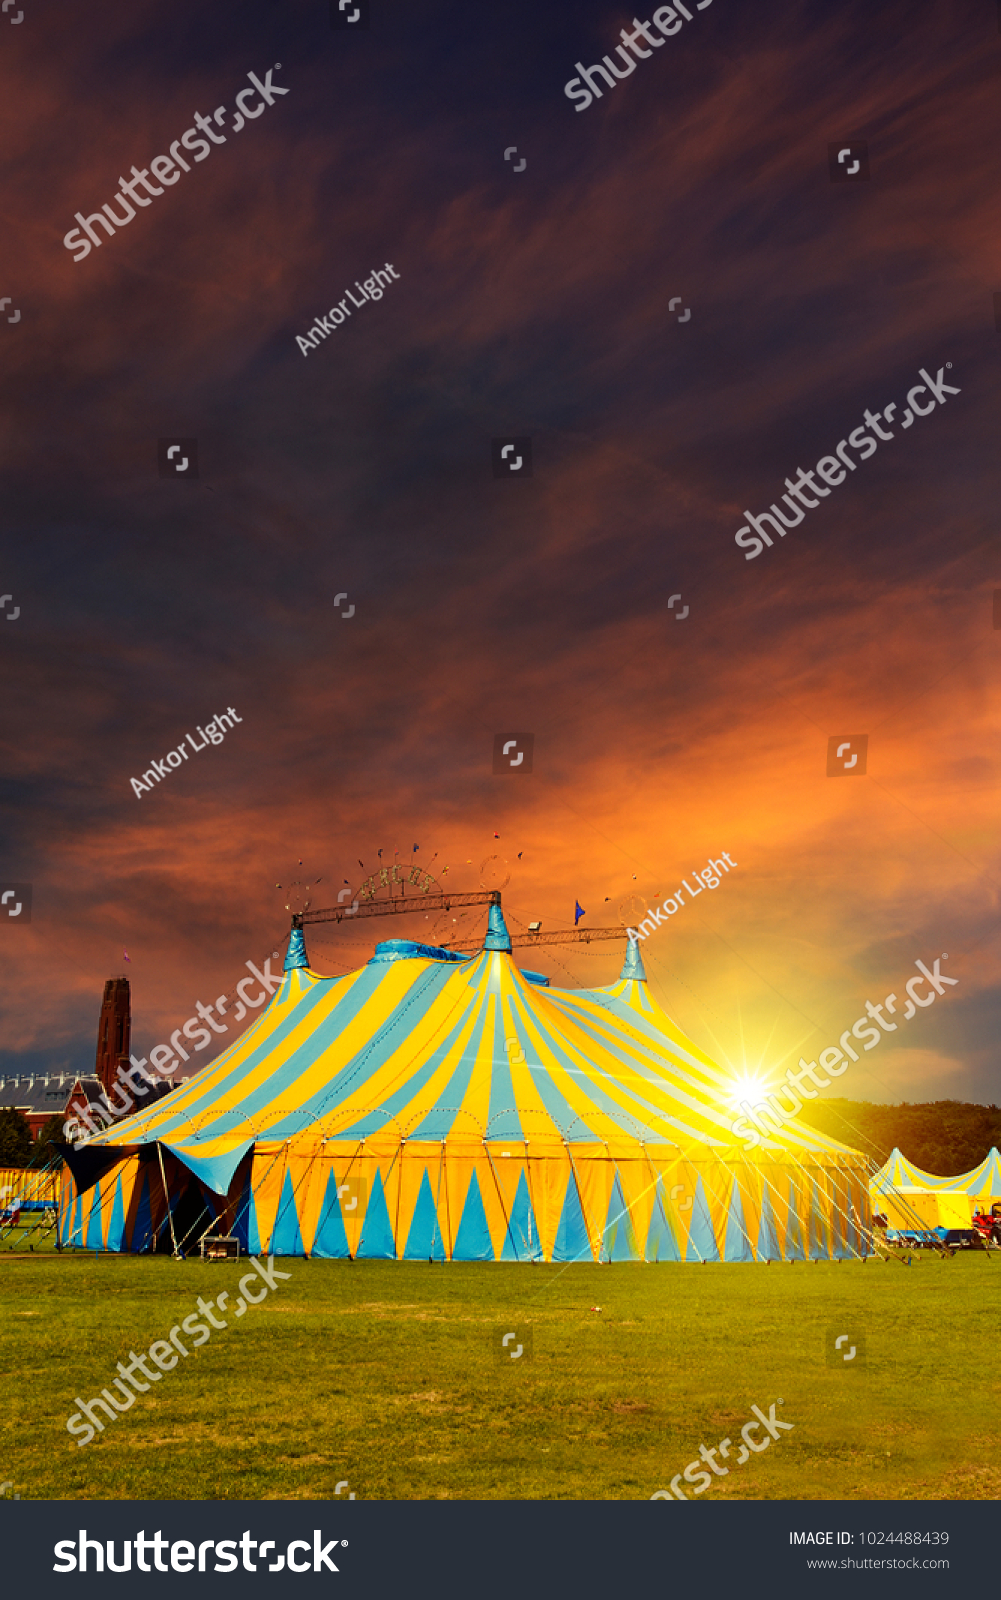 Nonamed circus tent under a warn sunset and chaotic sky without the name of the circus company which is cloned out and replaced by the metallic structure #1024488439